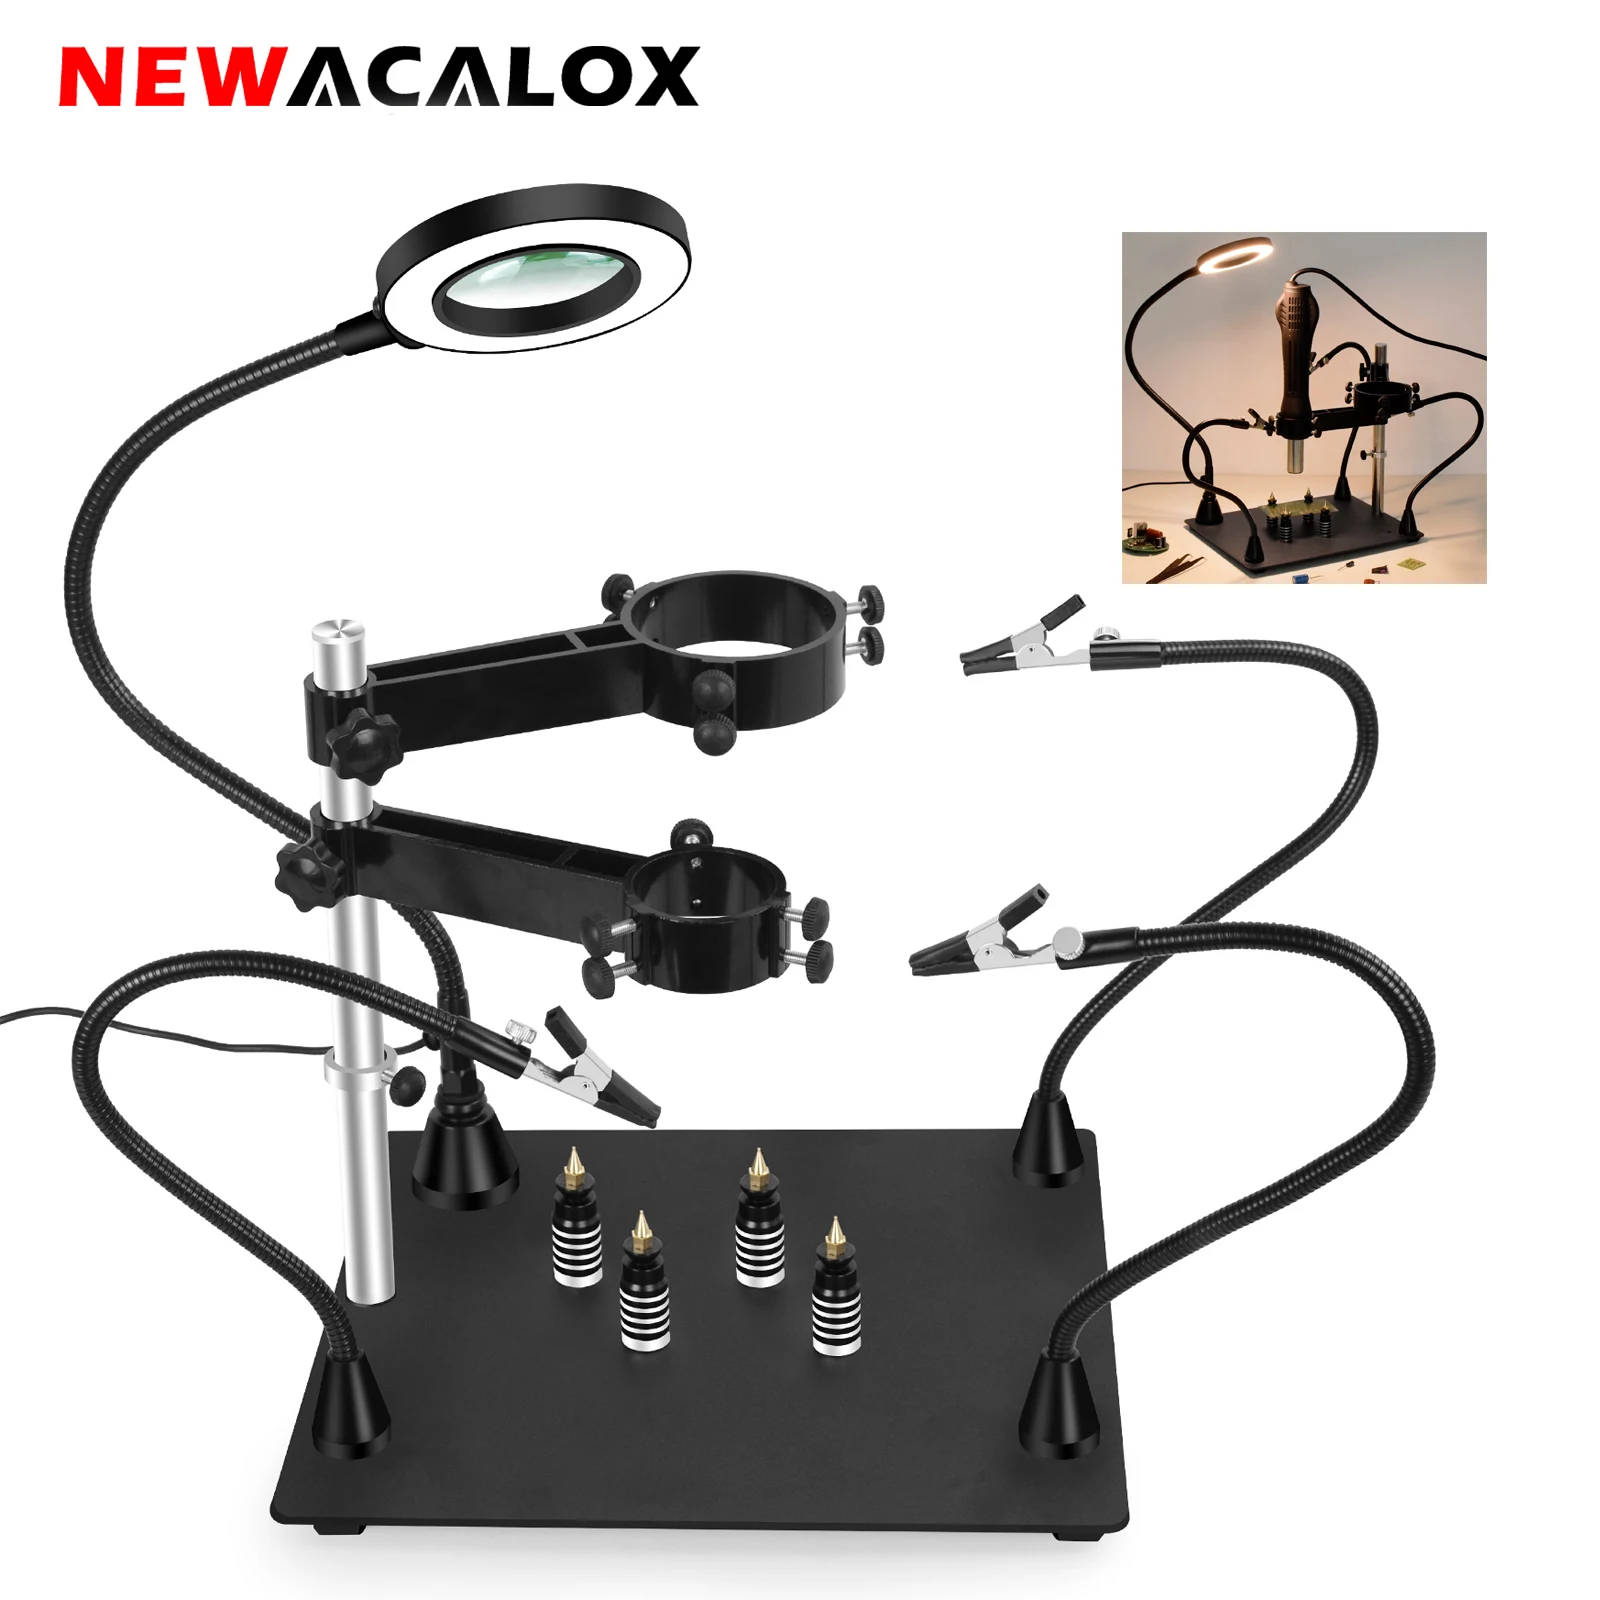 NEWACALOX Magnetic PCB Board Fixed Clip Flexible Arm Soldering Third Hand 5X Magnifier Glass Soldering Iron Holder Repair Tools